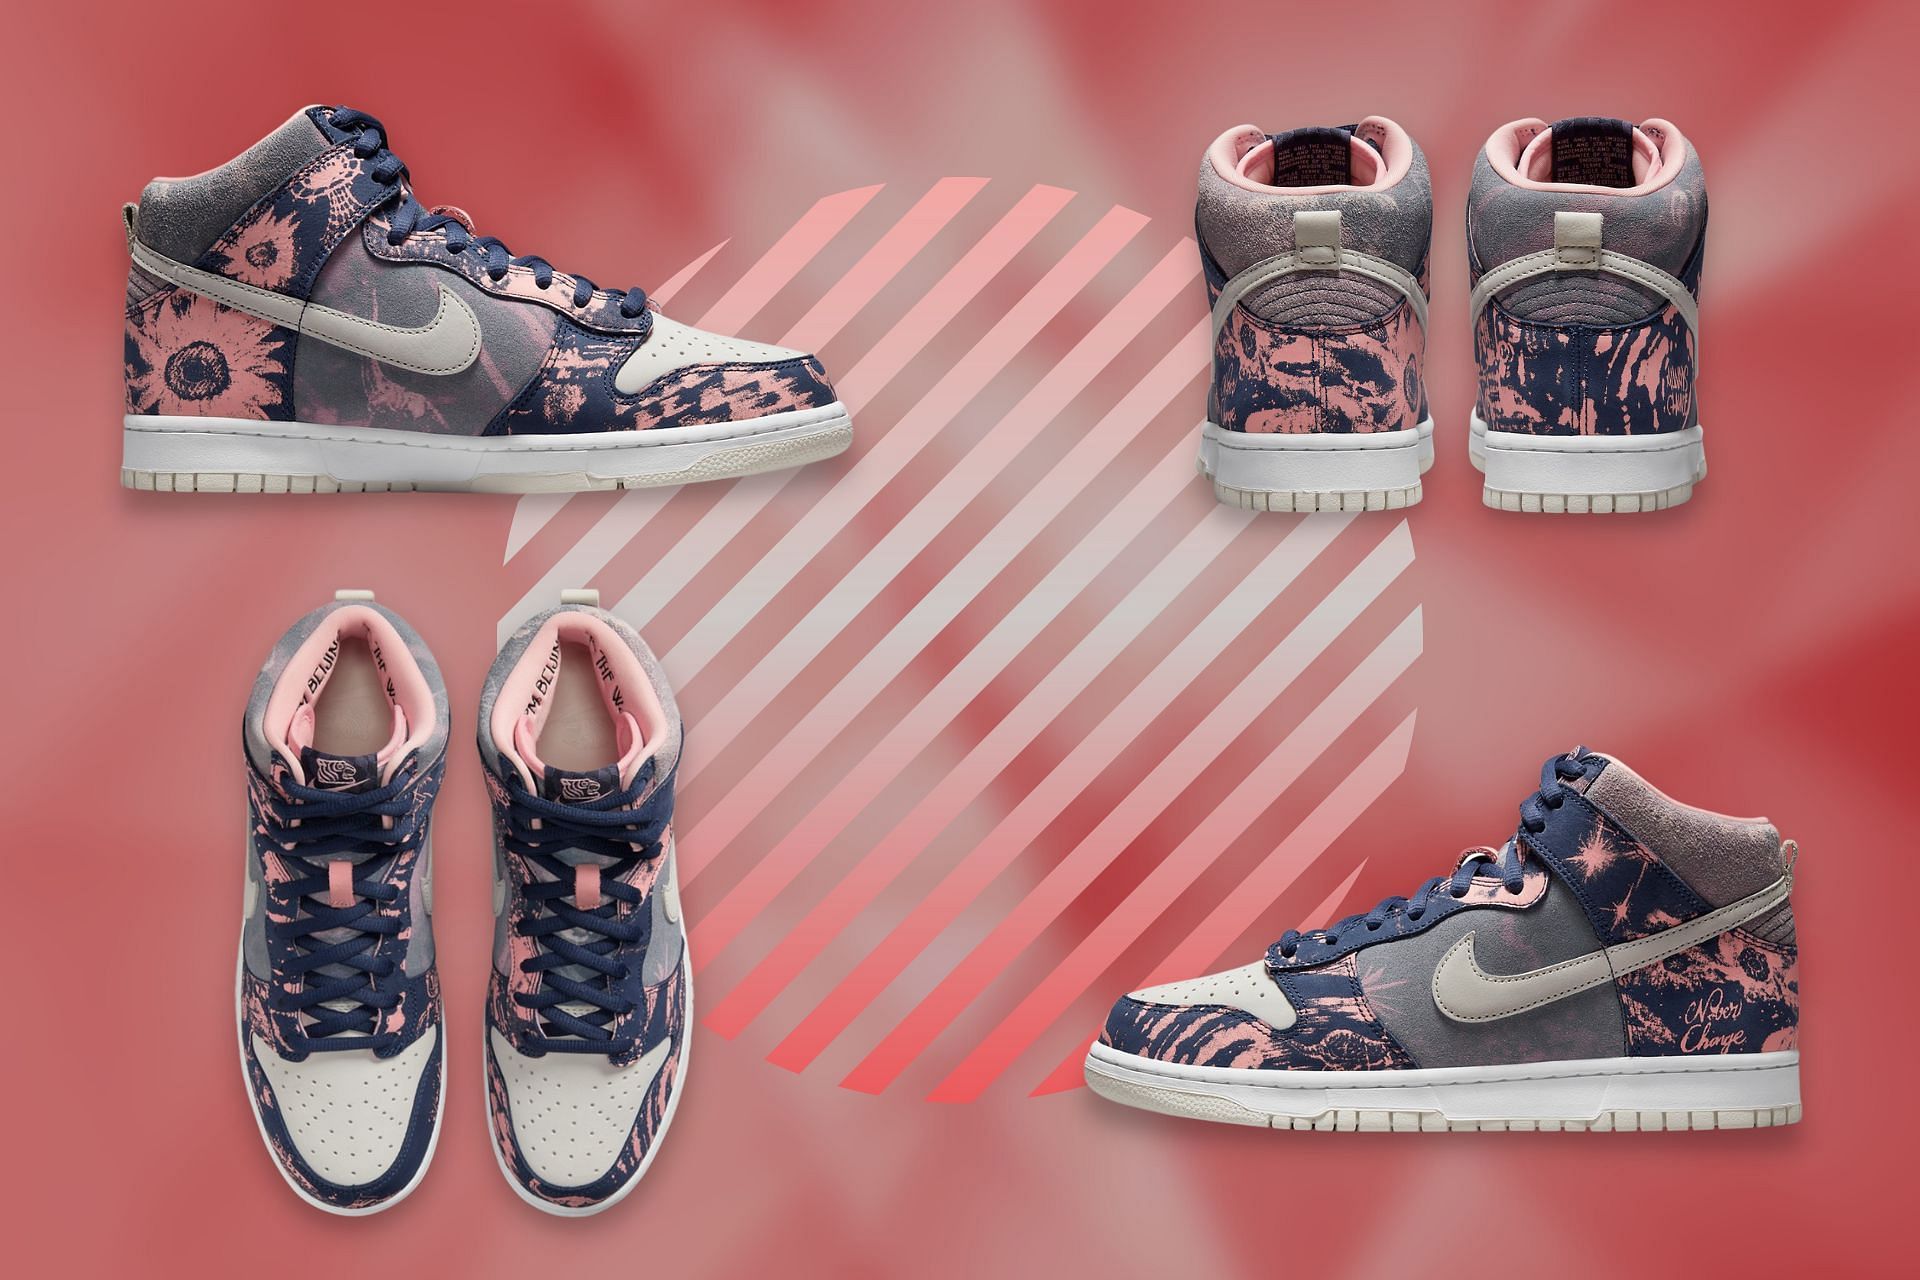 The upcoming Soulgoods x Nike Dunk High &quot;00s&quot; sneakers launching in abstract colorway and prints (Image via Sportskeeda)